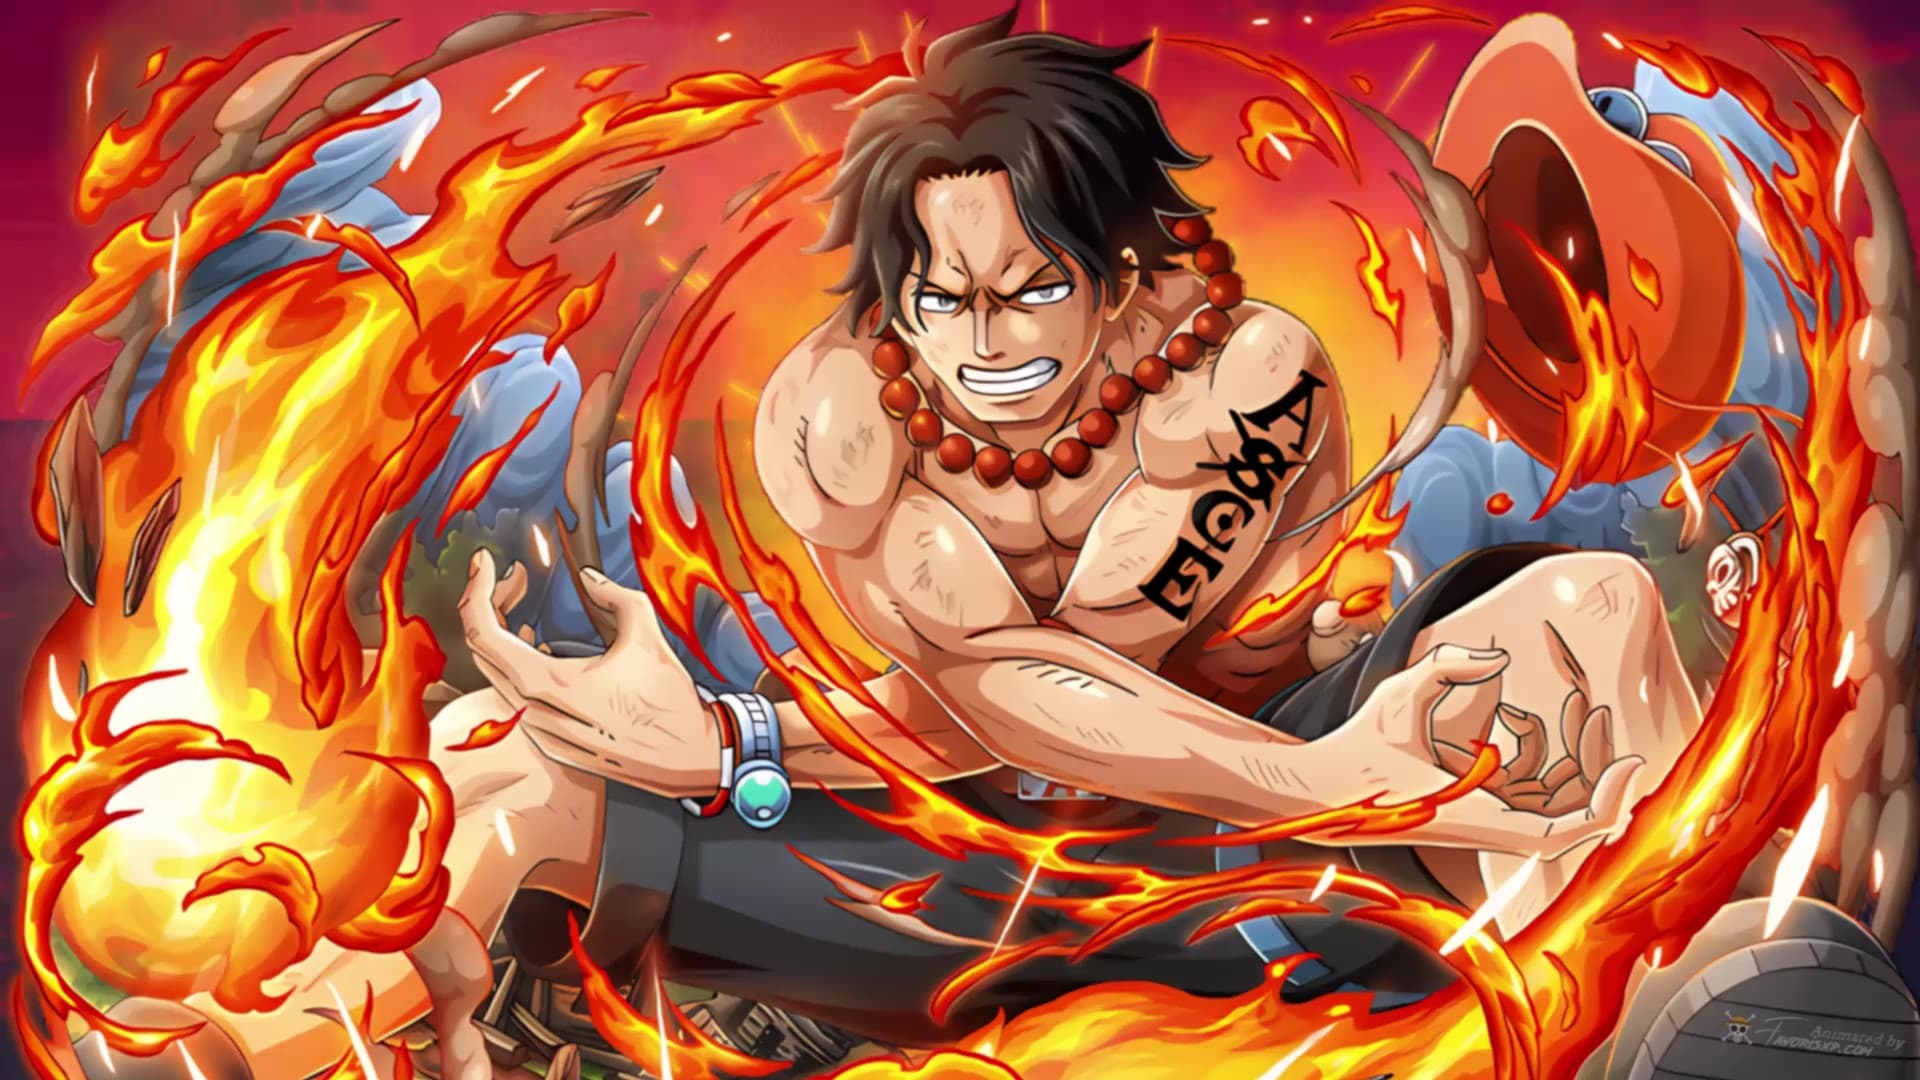 Ace One Piece Animated Wallpaper by Favorisxp on DeviantArt